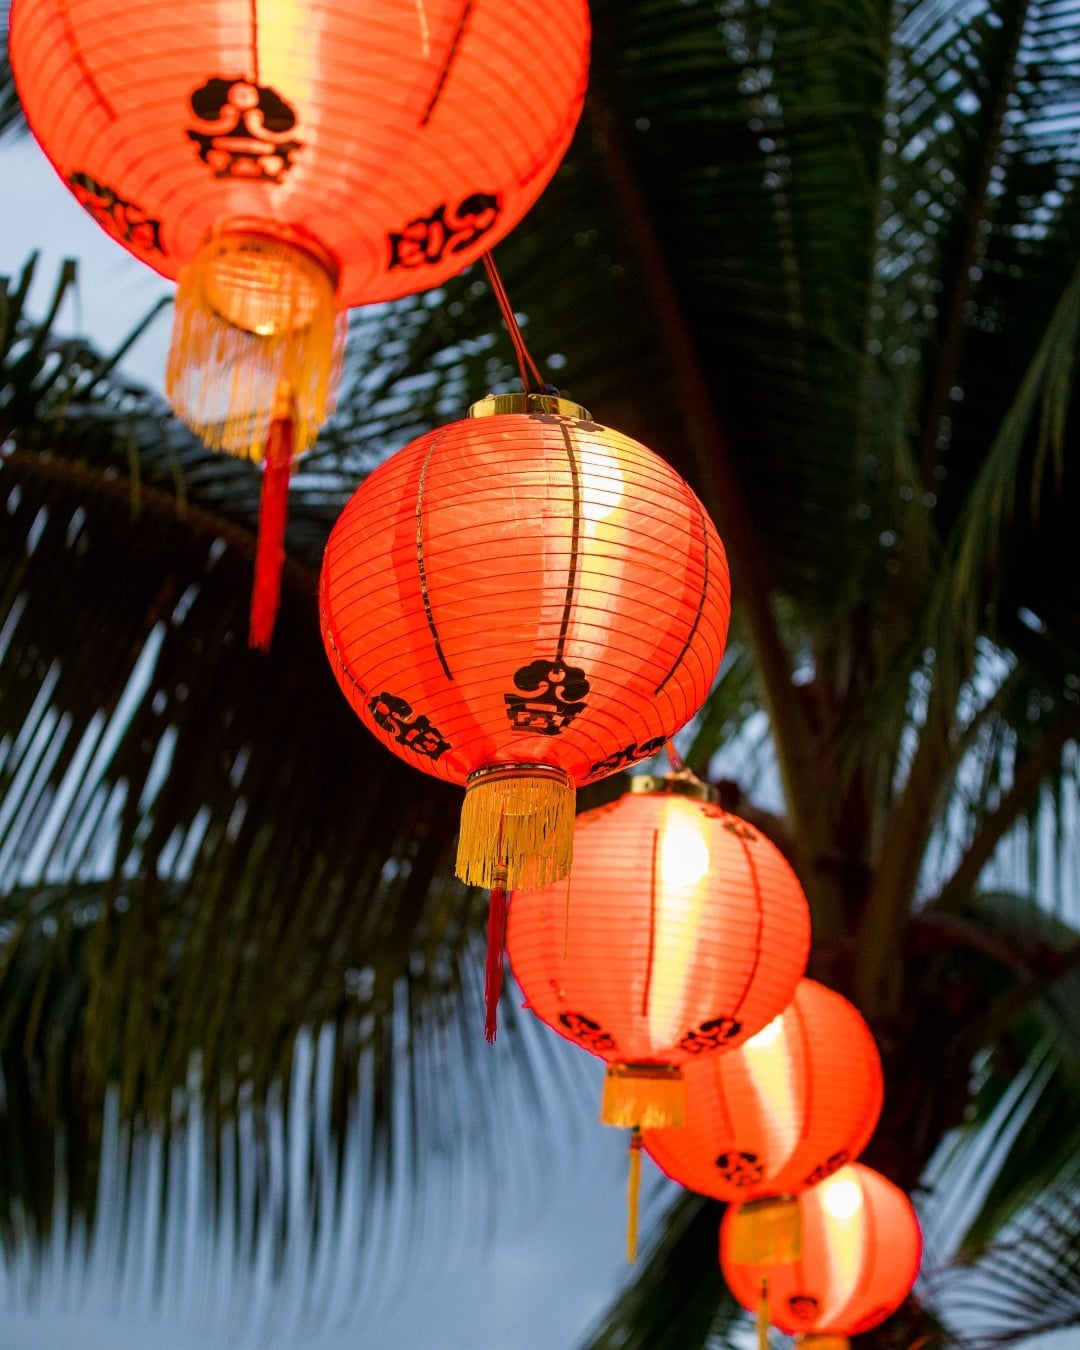 Celebrate the Lunar New Year at Ward Village! From January 22 to February 6, discover lucky lion photo opportunities, find festive lanterns at Victoria Ward Park and stop by participating retailers handing out special red envelopes with good luck wishes (while supplies last). #wardvillage #lunarnewyear #lunarnewyearhawaii #hawaii #oahu